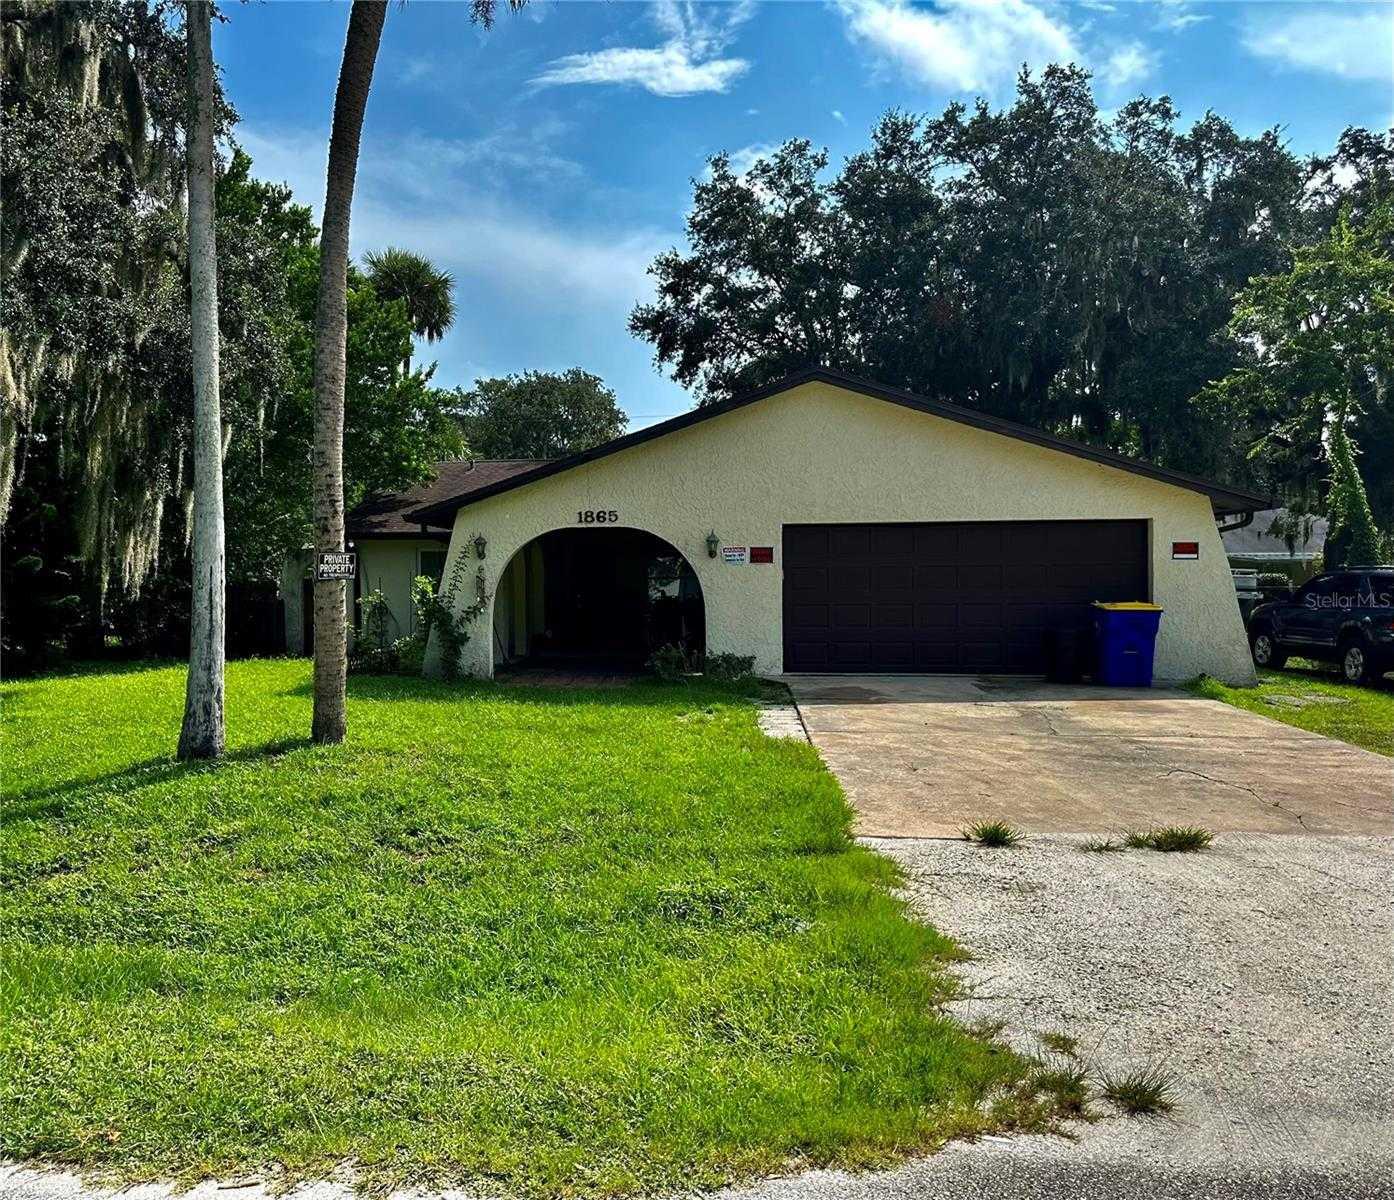 1865 ORANGE TREE, EDGEWATER, Single Family Residence,  for sale, Natalie Amento, PA, Florida Realty Investments